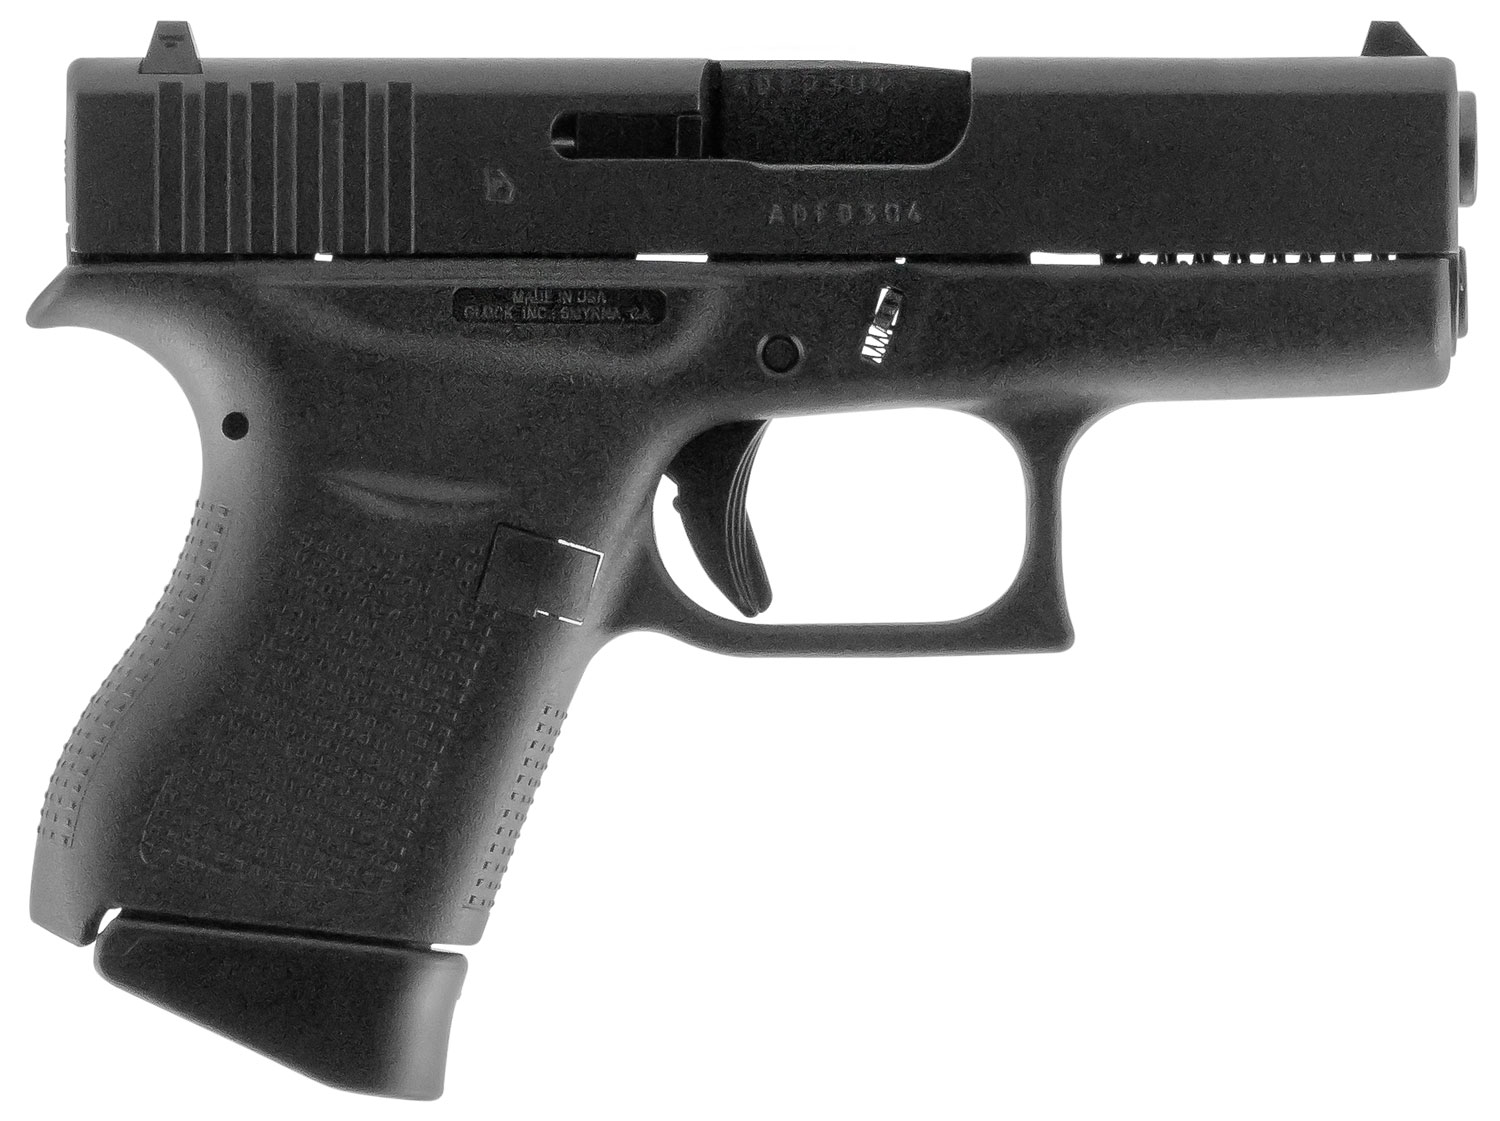 Glock UI4350201 G43 Subcompact 9mm Luger Caliber with 3.41